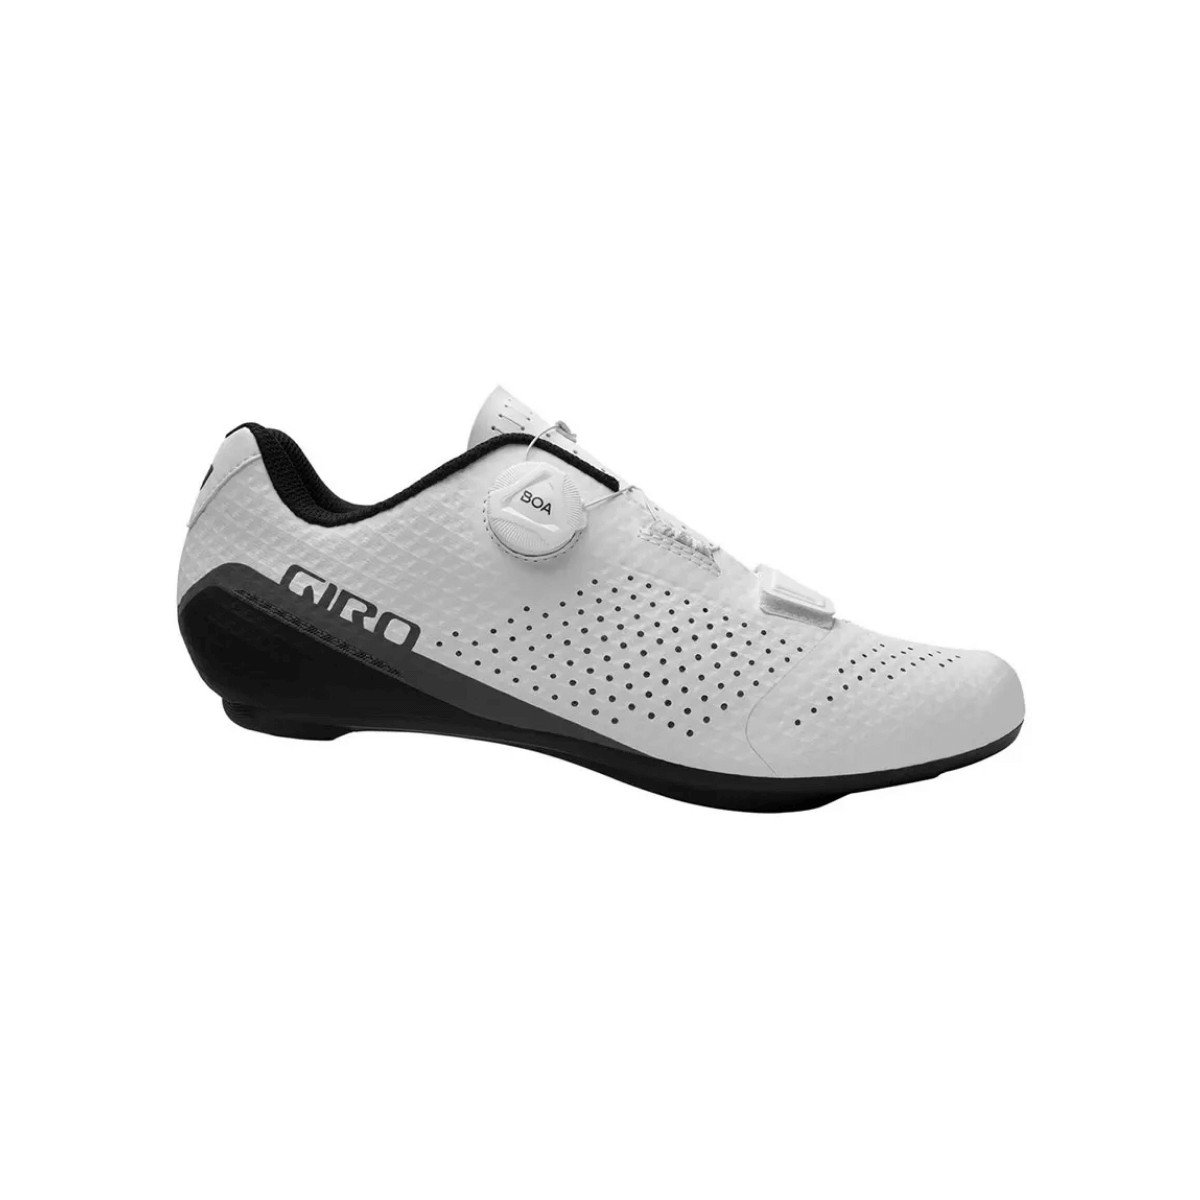 Chaussures Giro Cadet Blanc, Taille 40 - EUR